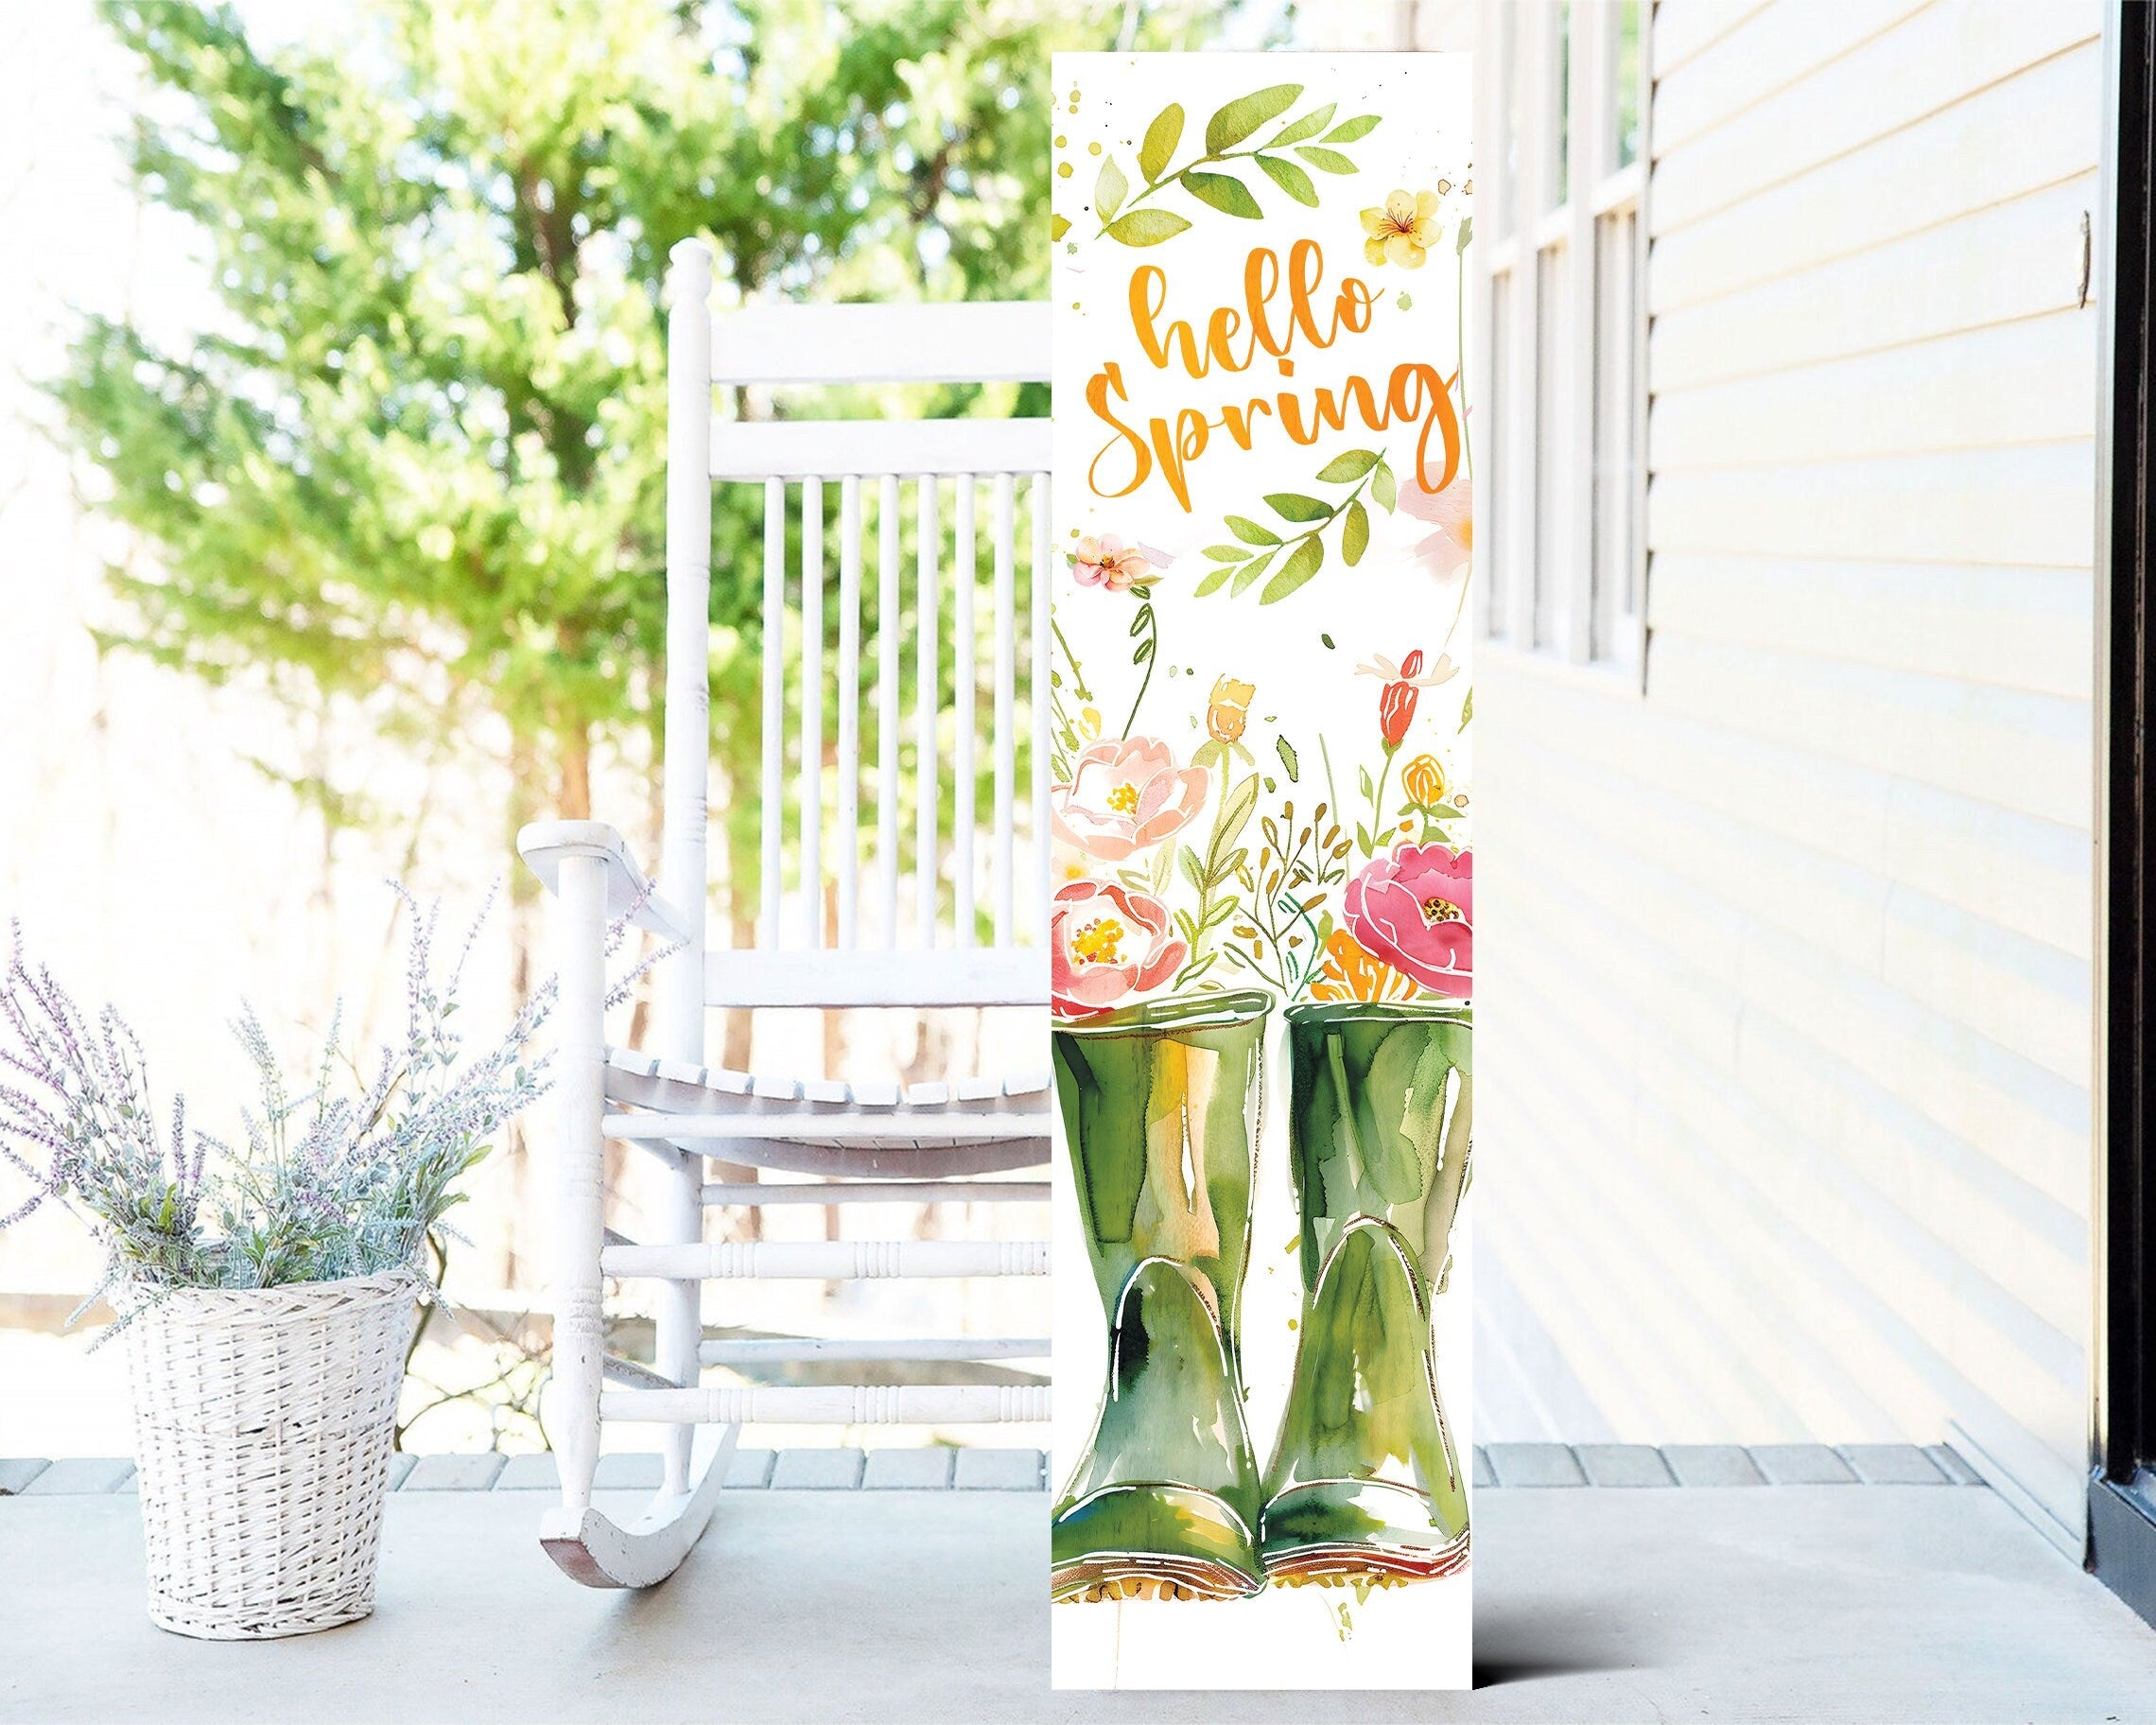 36-Inch-'Hello-Spring'-Wooden-Porch-Sign-with-Rain-Boot-&-Floral-Design-